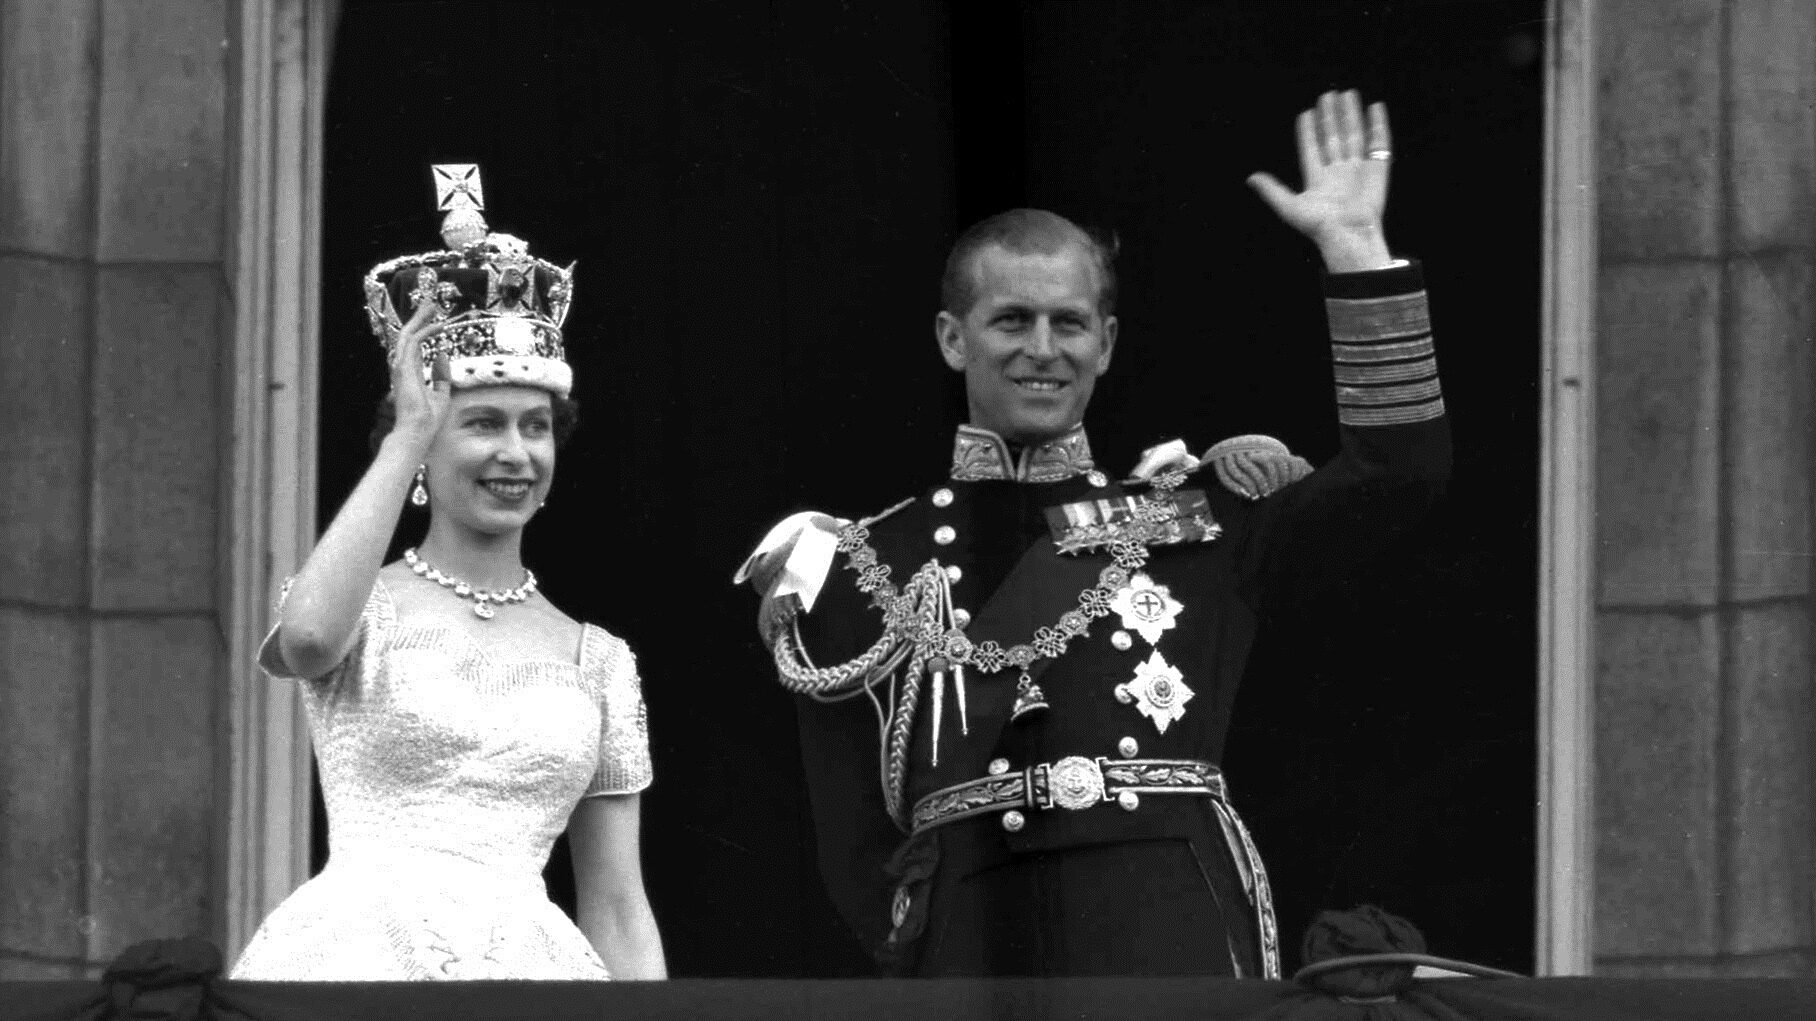 FILE - In this June. 2, 1953 file photo, Britain's Queen Elizabeth II and Prince Philip, Duke of Edinburgh wave to supporters from the balcony at Buckingham Palace, following her coronation at Westminster Abbey, London. Queen Elizabeth II, Britain’s longest-reigning monarch and a rock of stability across much of a turbulent century, has died. She was 96. Buckingham Palace made the announcement in a statement on Thursday Sept. 8, 2022. (AP Photo/Leslie Priest, File)